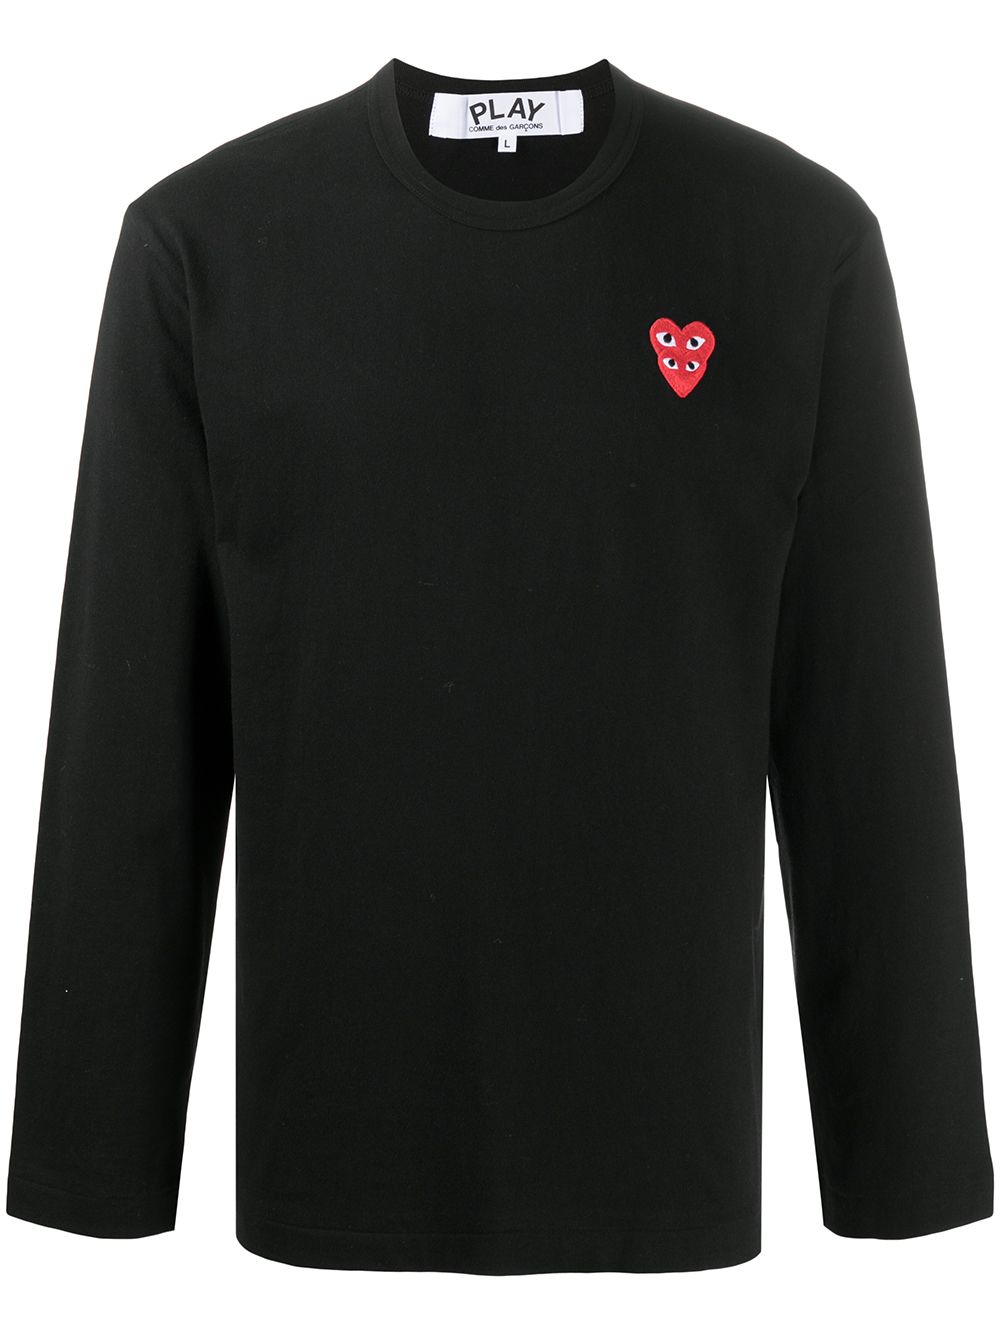 Comme Des Garçons Play embroidered Two Heart T-shirt - Black von Comme Des Garçons Play